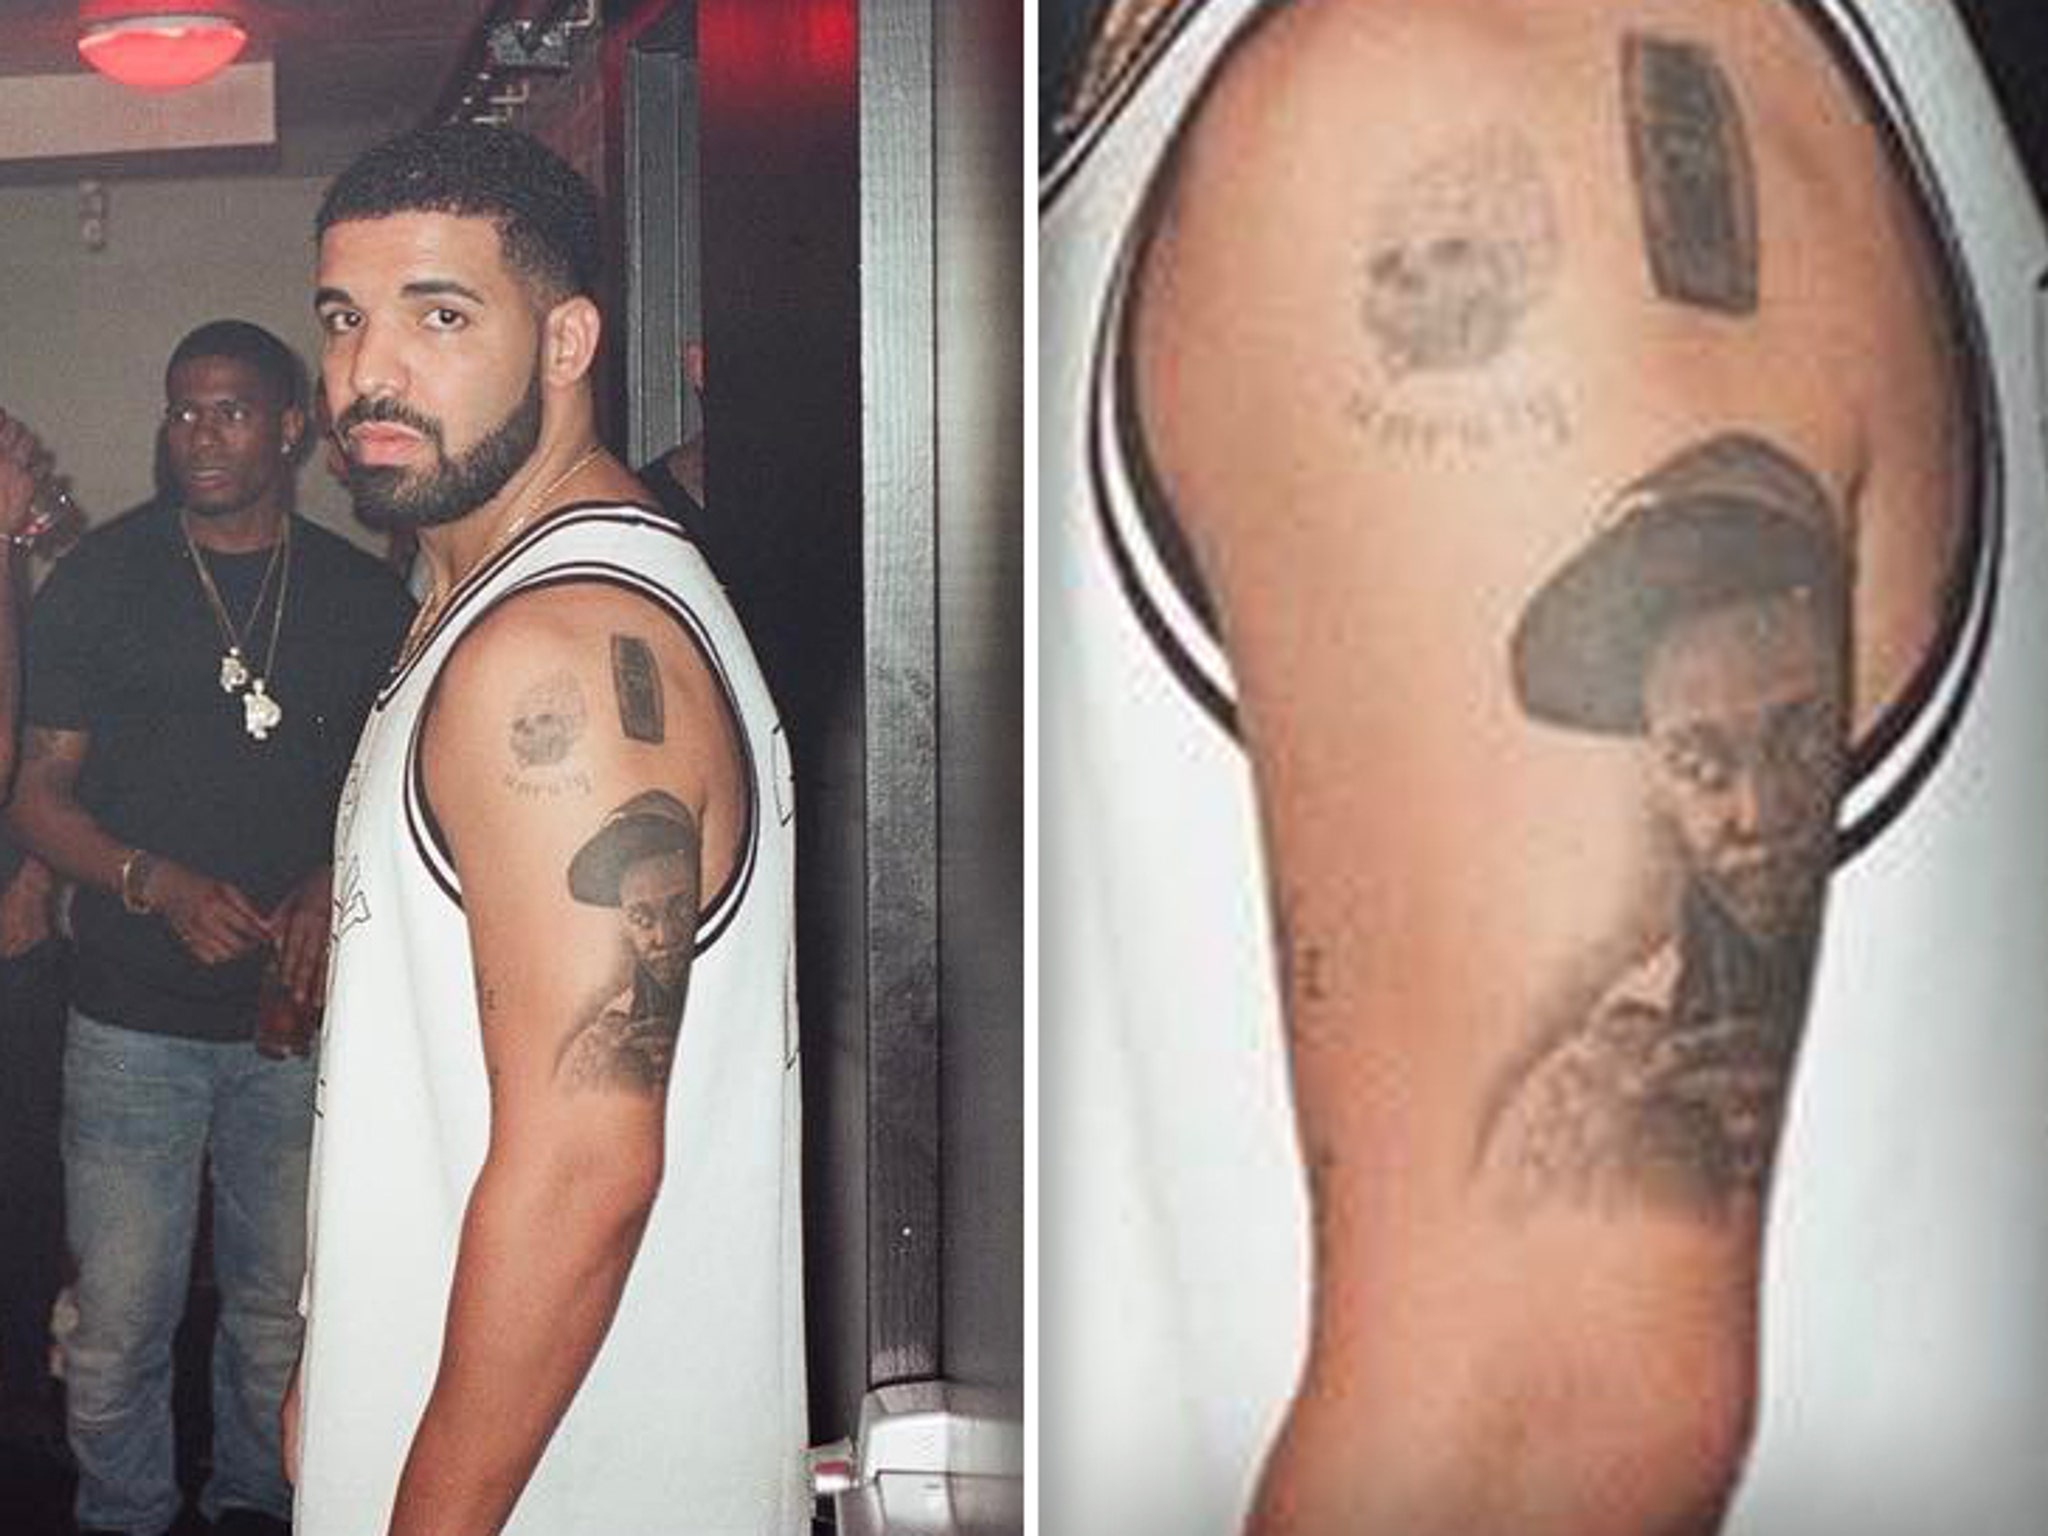 Blac Goss  Drakes back tattoos have not gone down well  Facebook